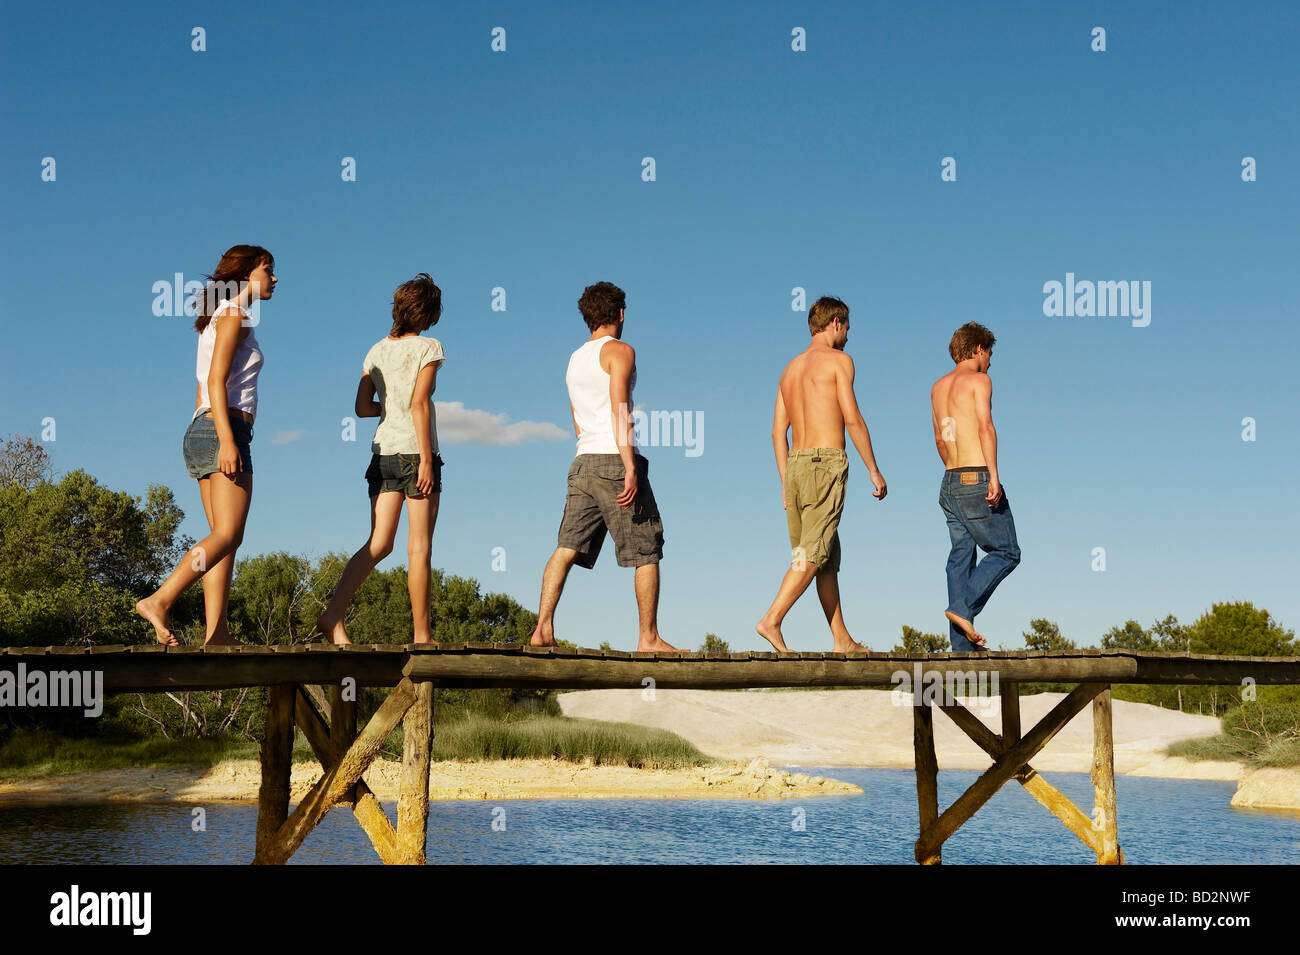 Group of young people walking on jetty Stock Photo